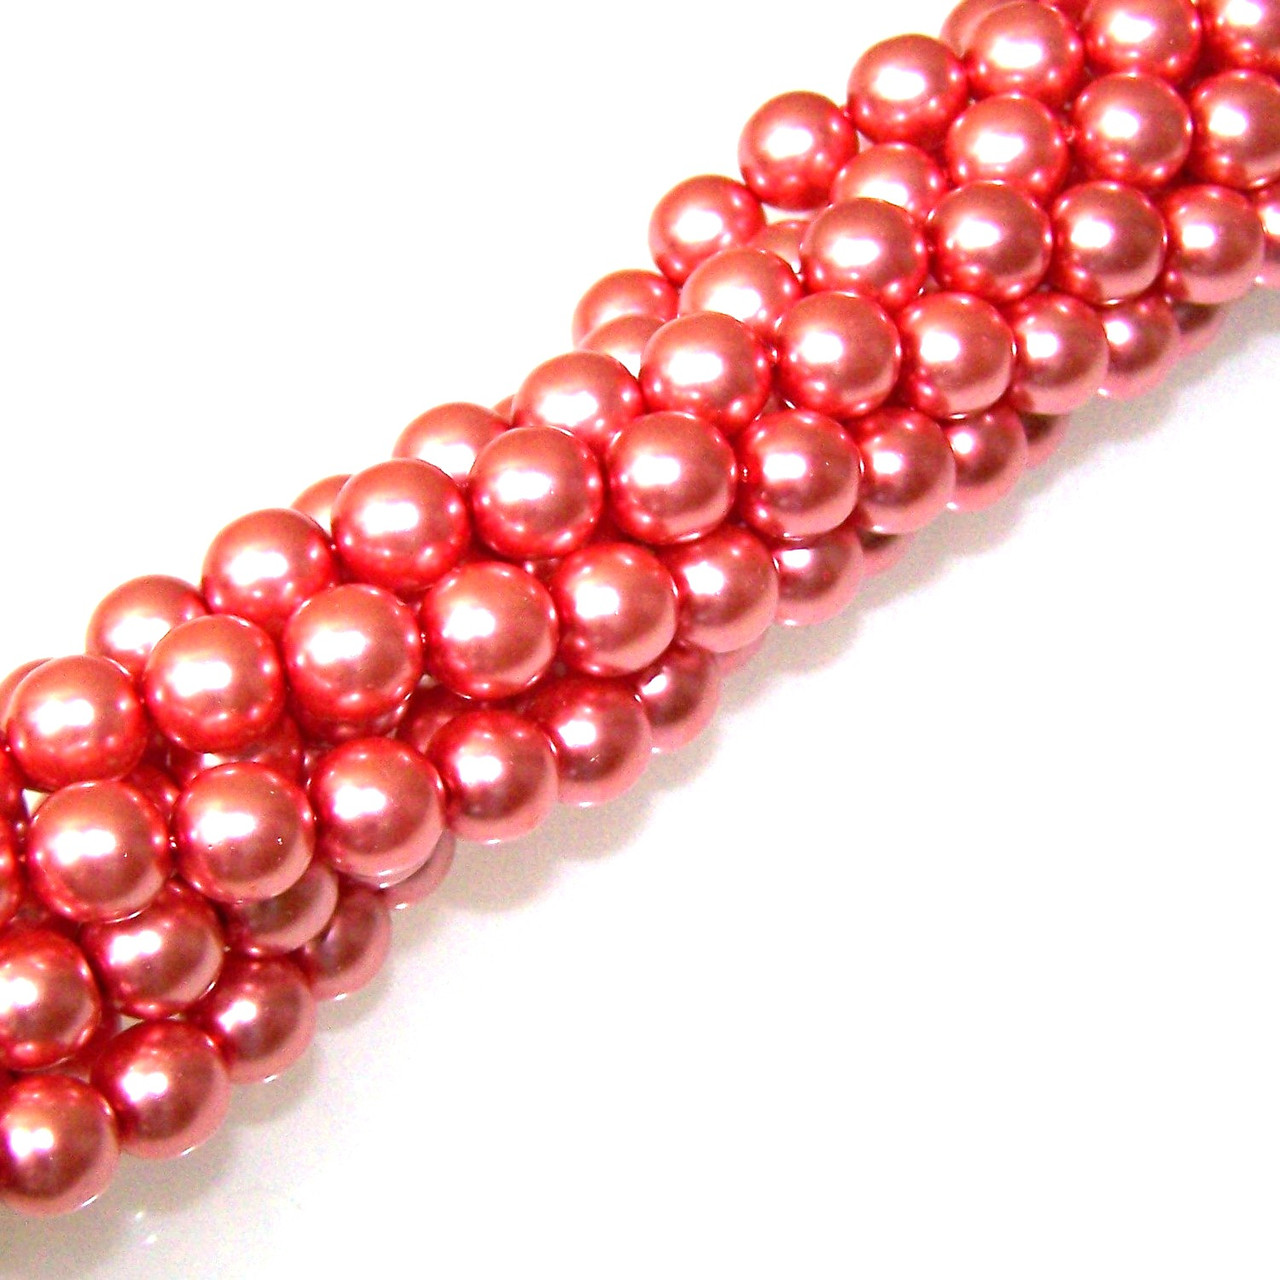 8mm Glass Round Pearl Beads - Red